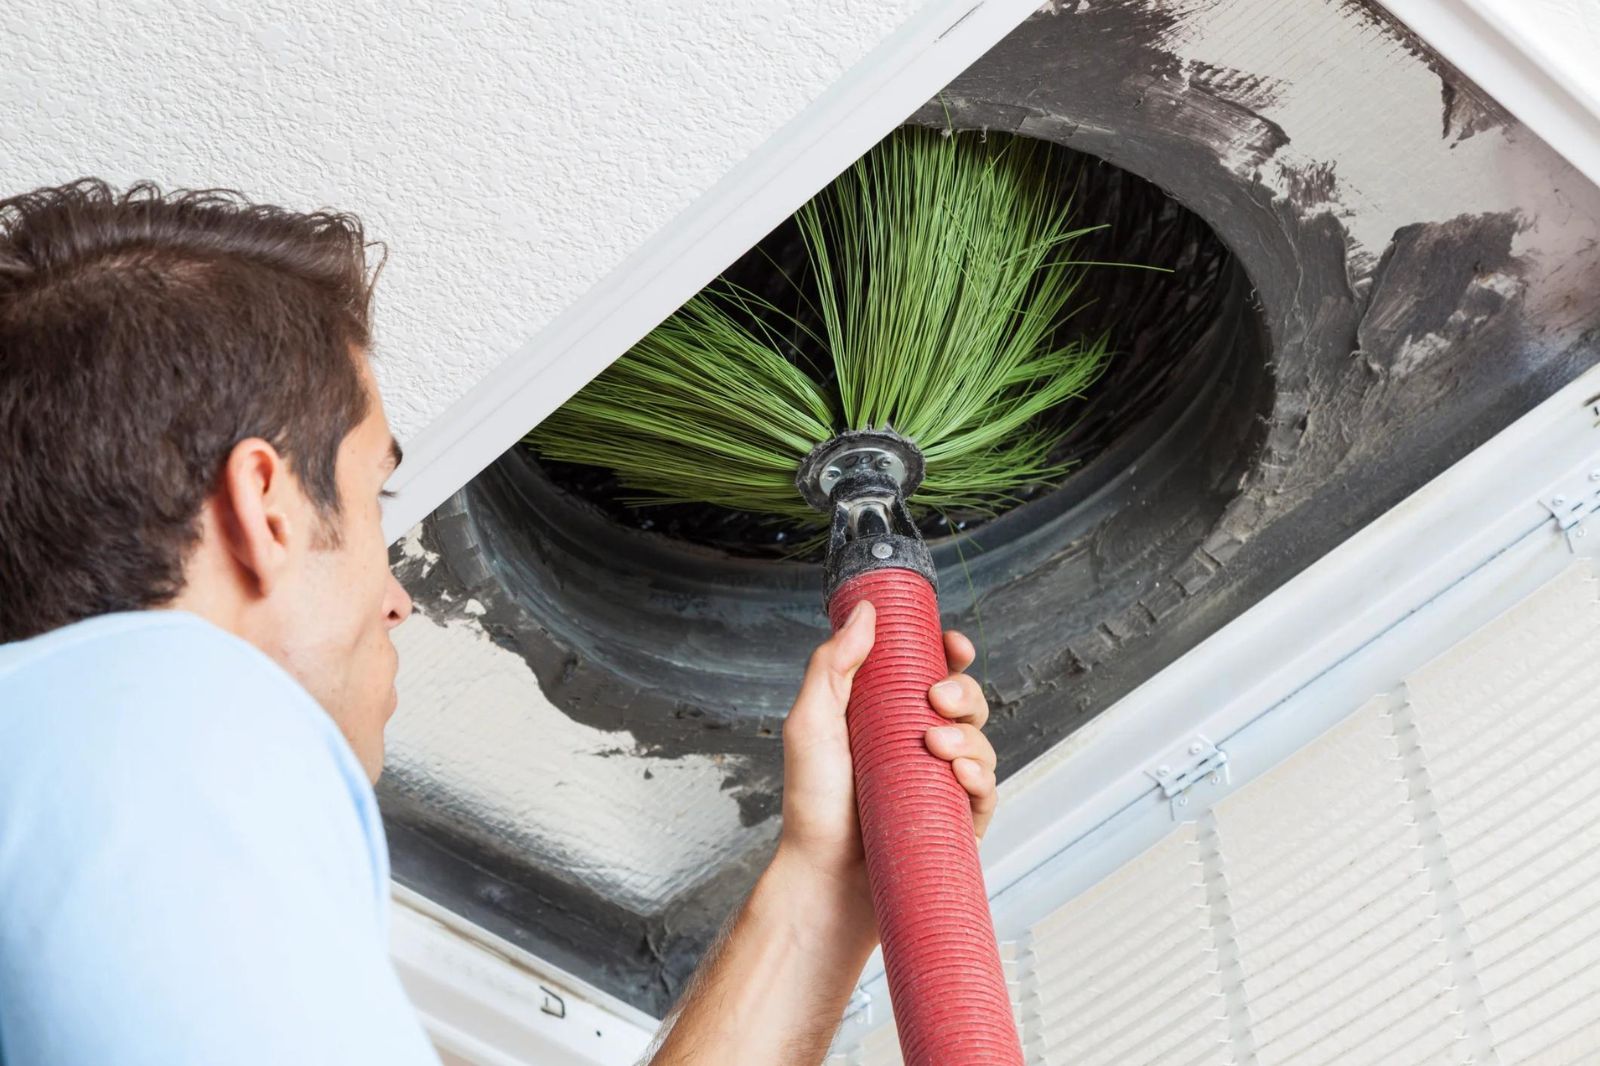 Duct Cleaning and Maintenance service is running for an residential project